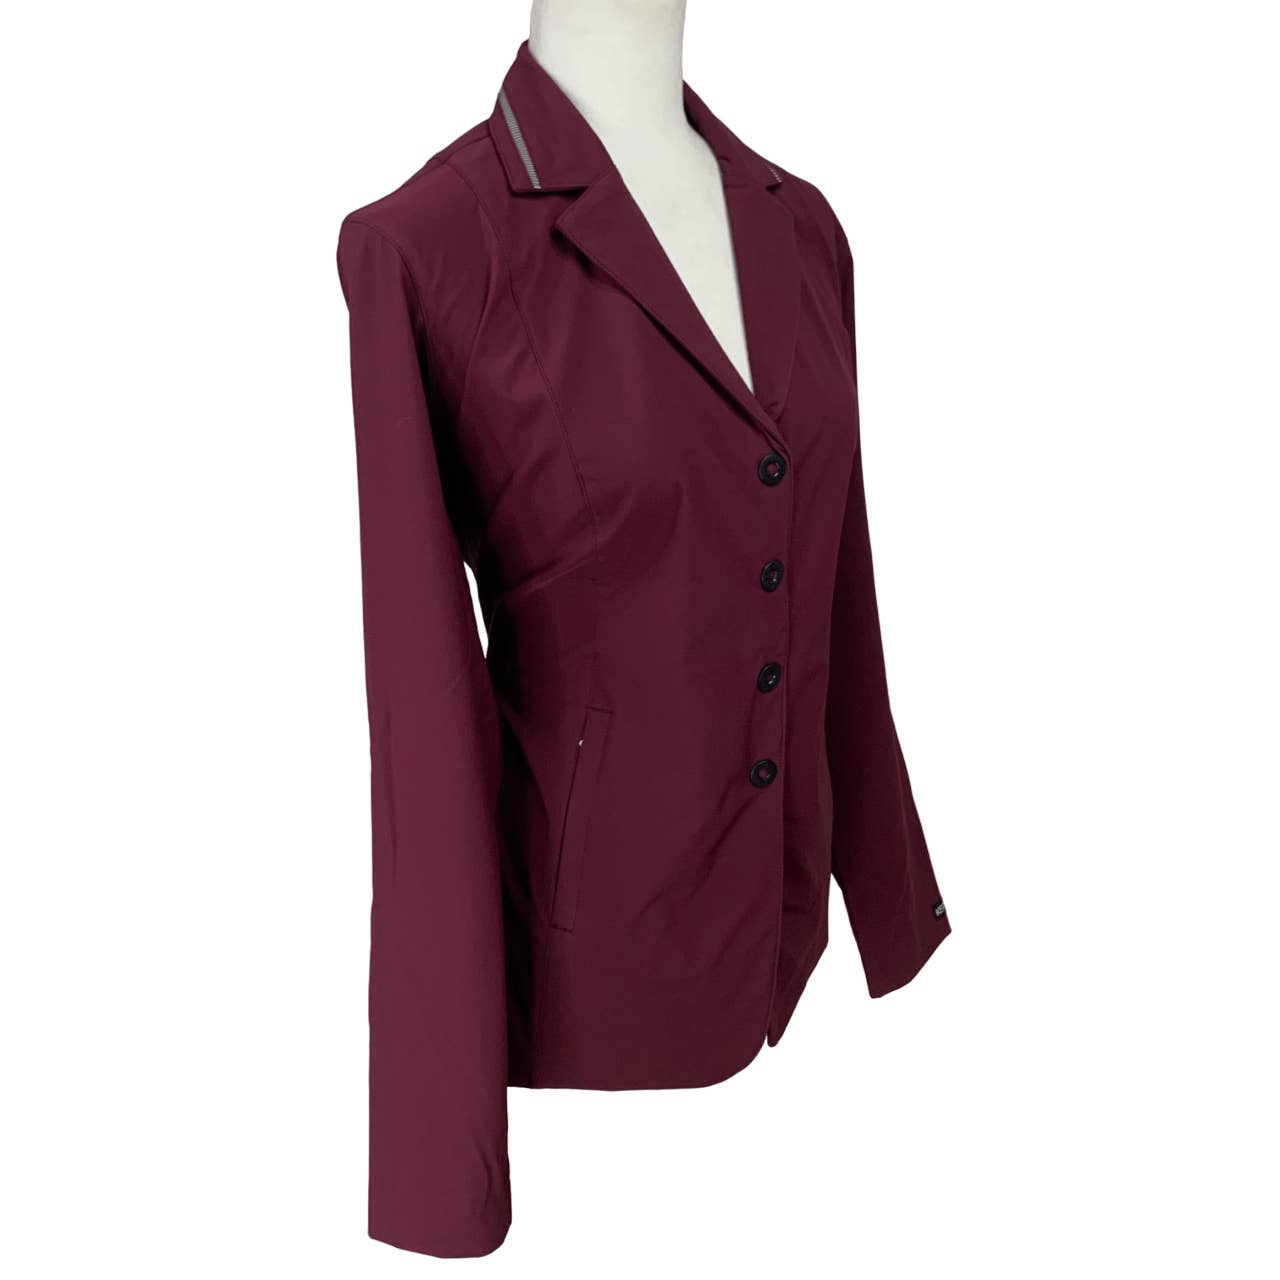 Kerrits 'Stretch Competitor Koat' 4 Snap in Burgundy - Woman's X-Large